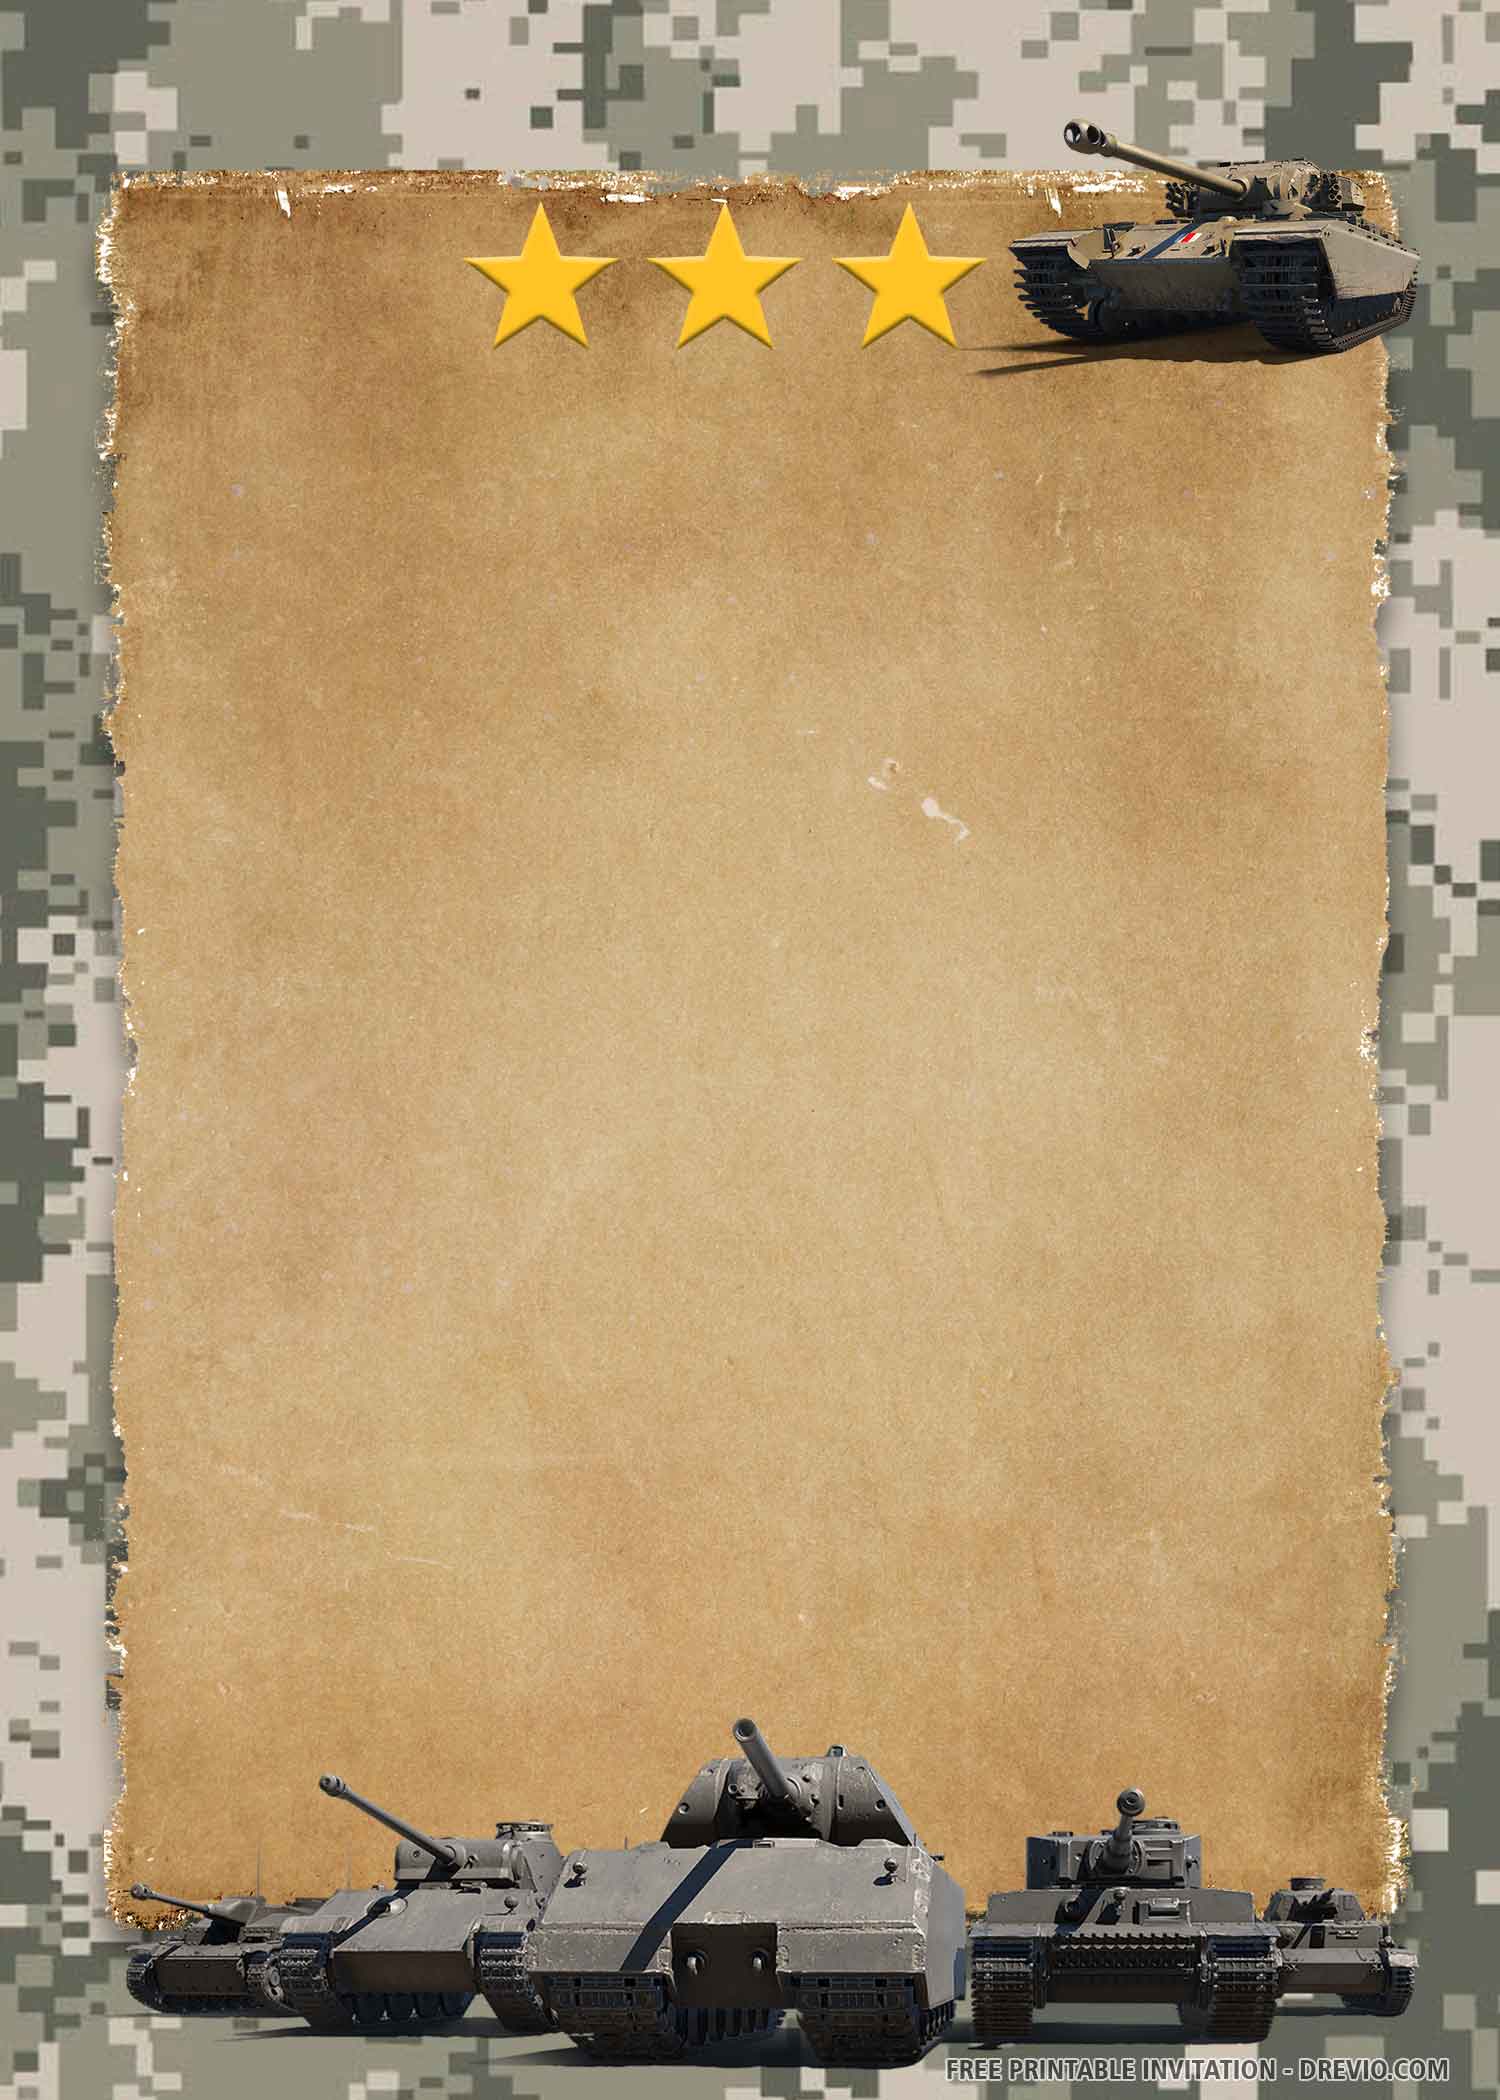 Free Printable Military Camouflage Birthday Invitation Templates Download Hundreds Free Printable Birthday Invitation Templates